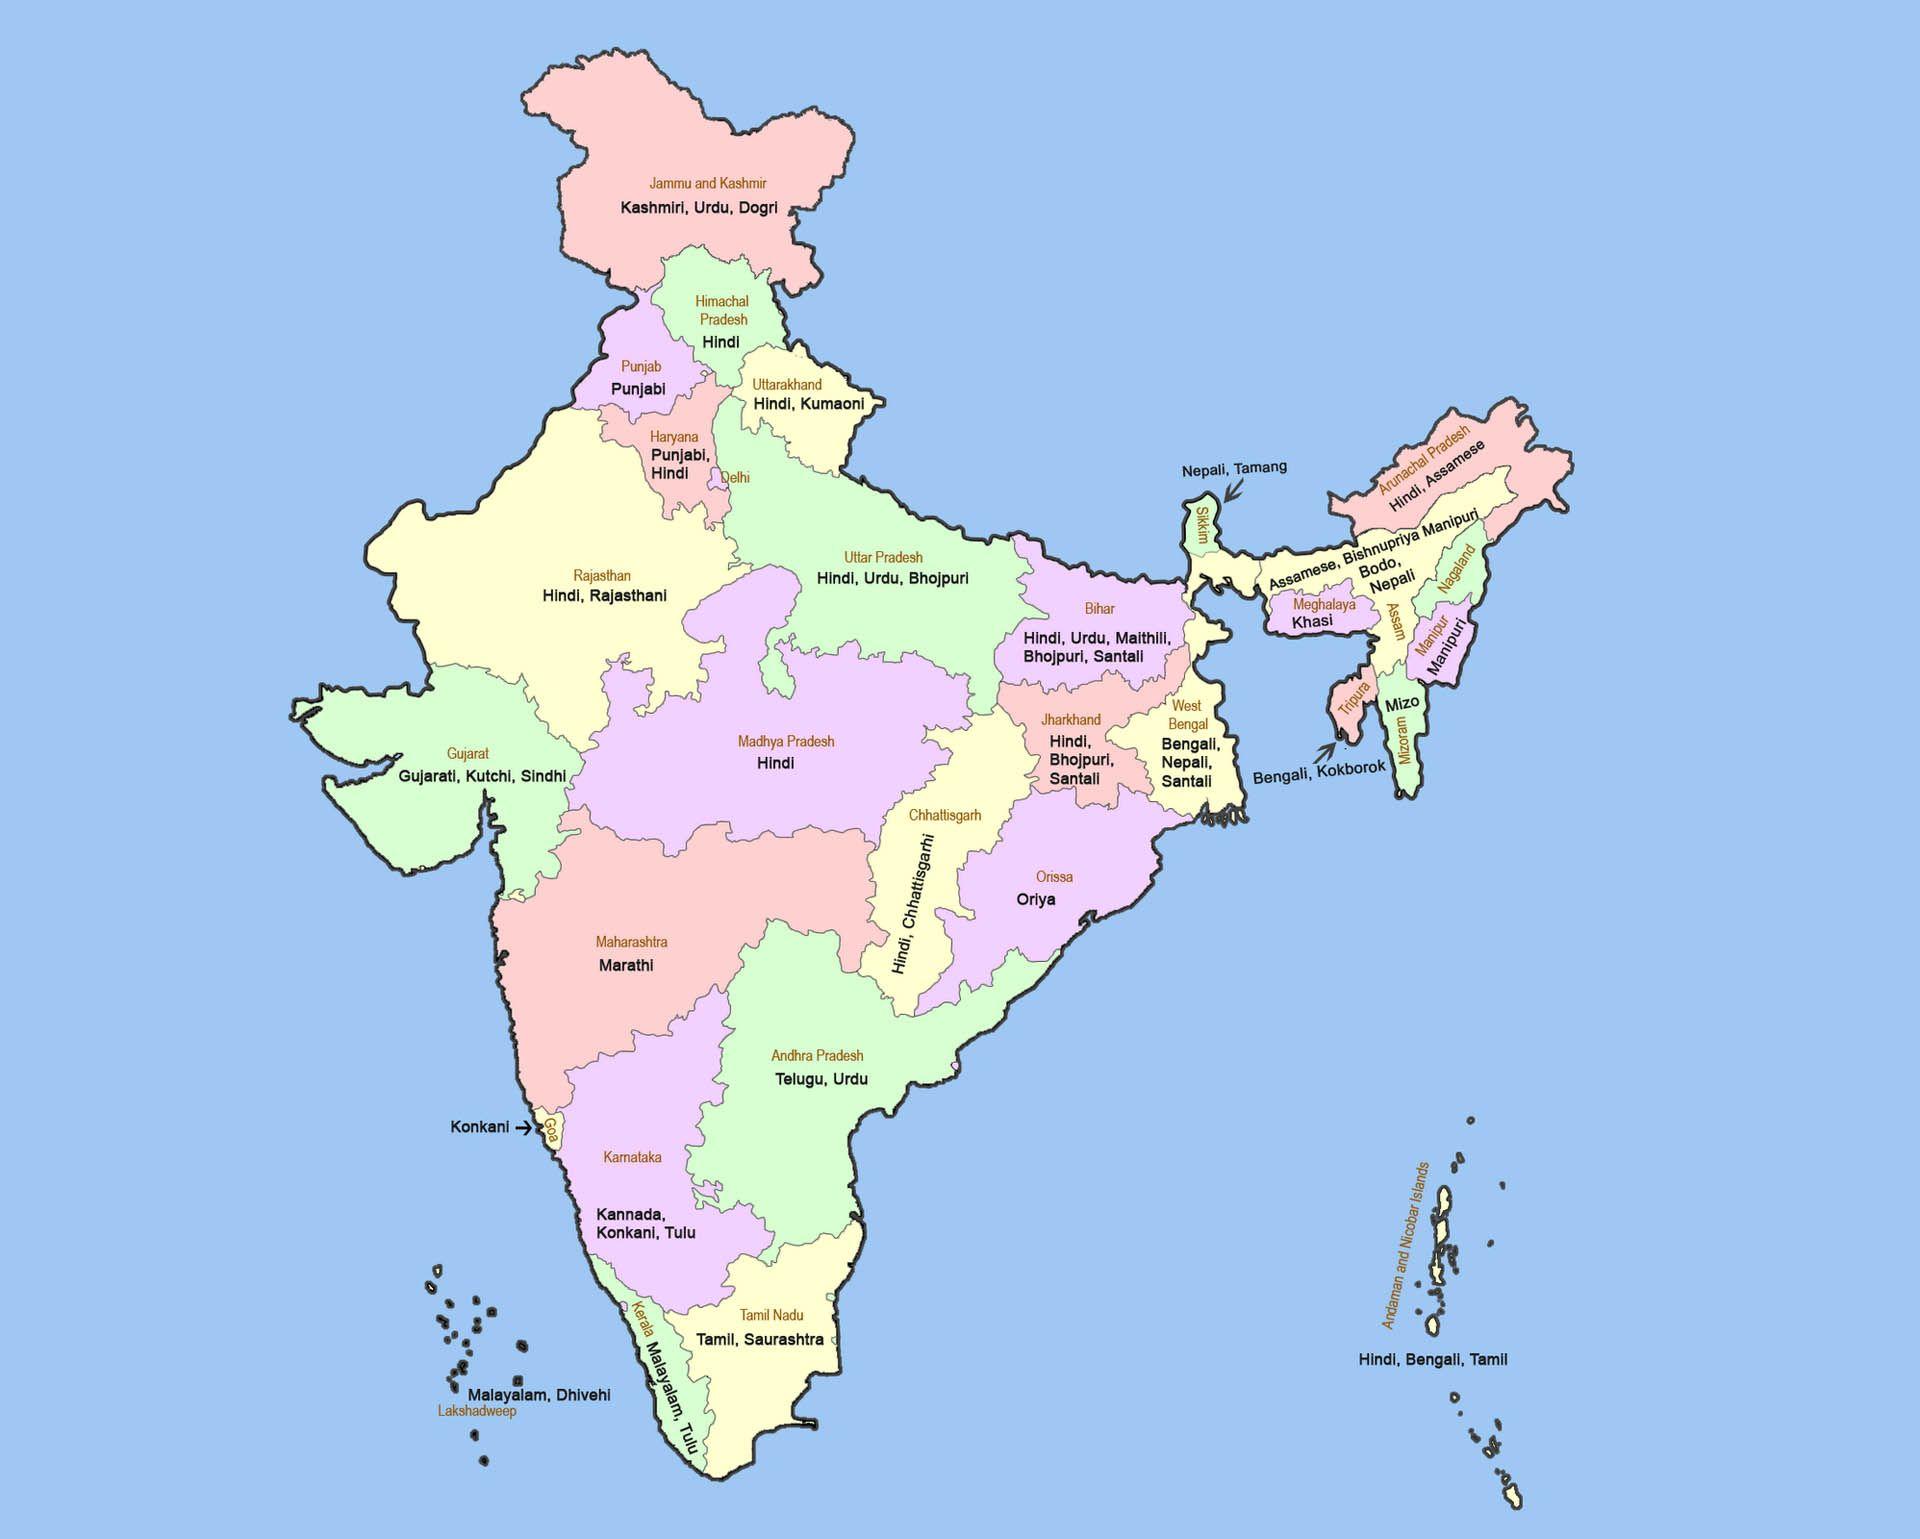 India Map Photo, Download India Map Wallpaper, Download Free. India map, Language map, Map